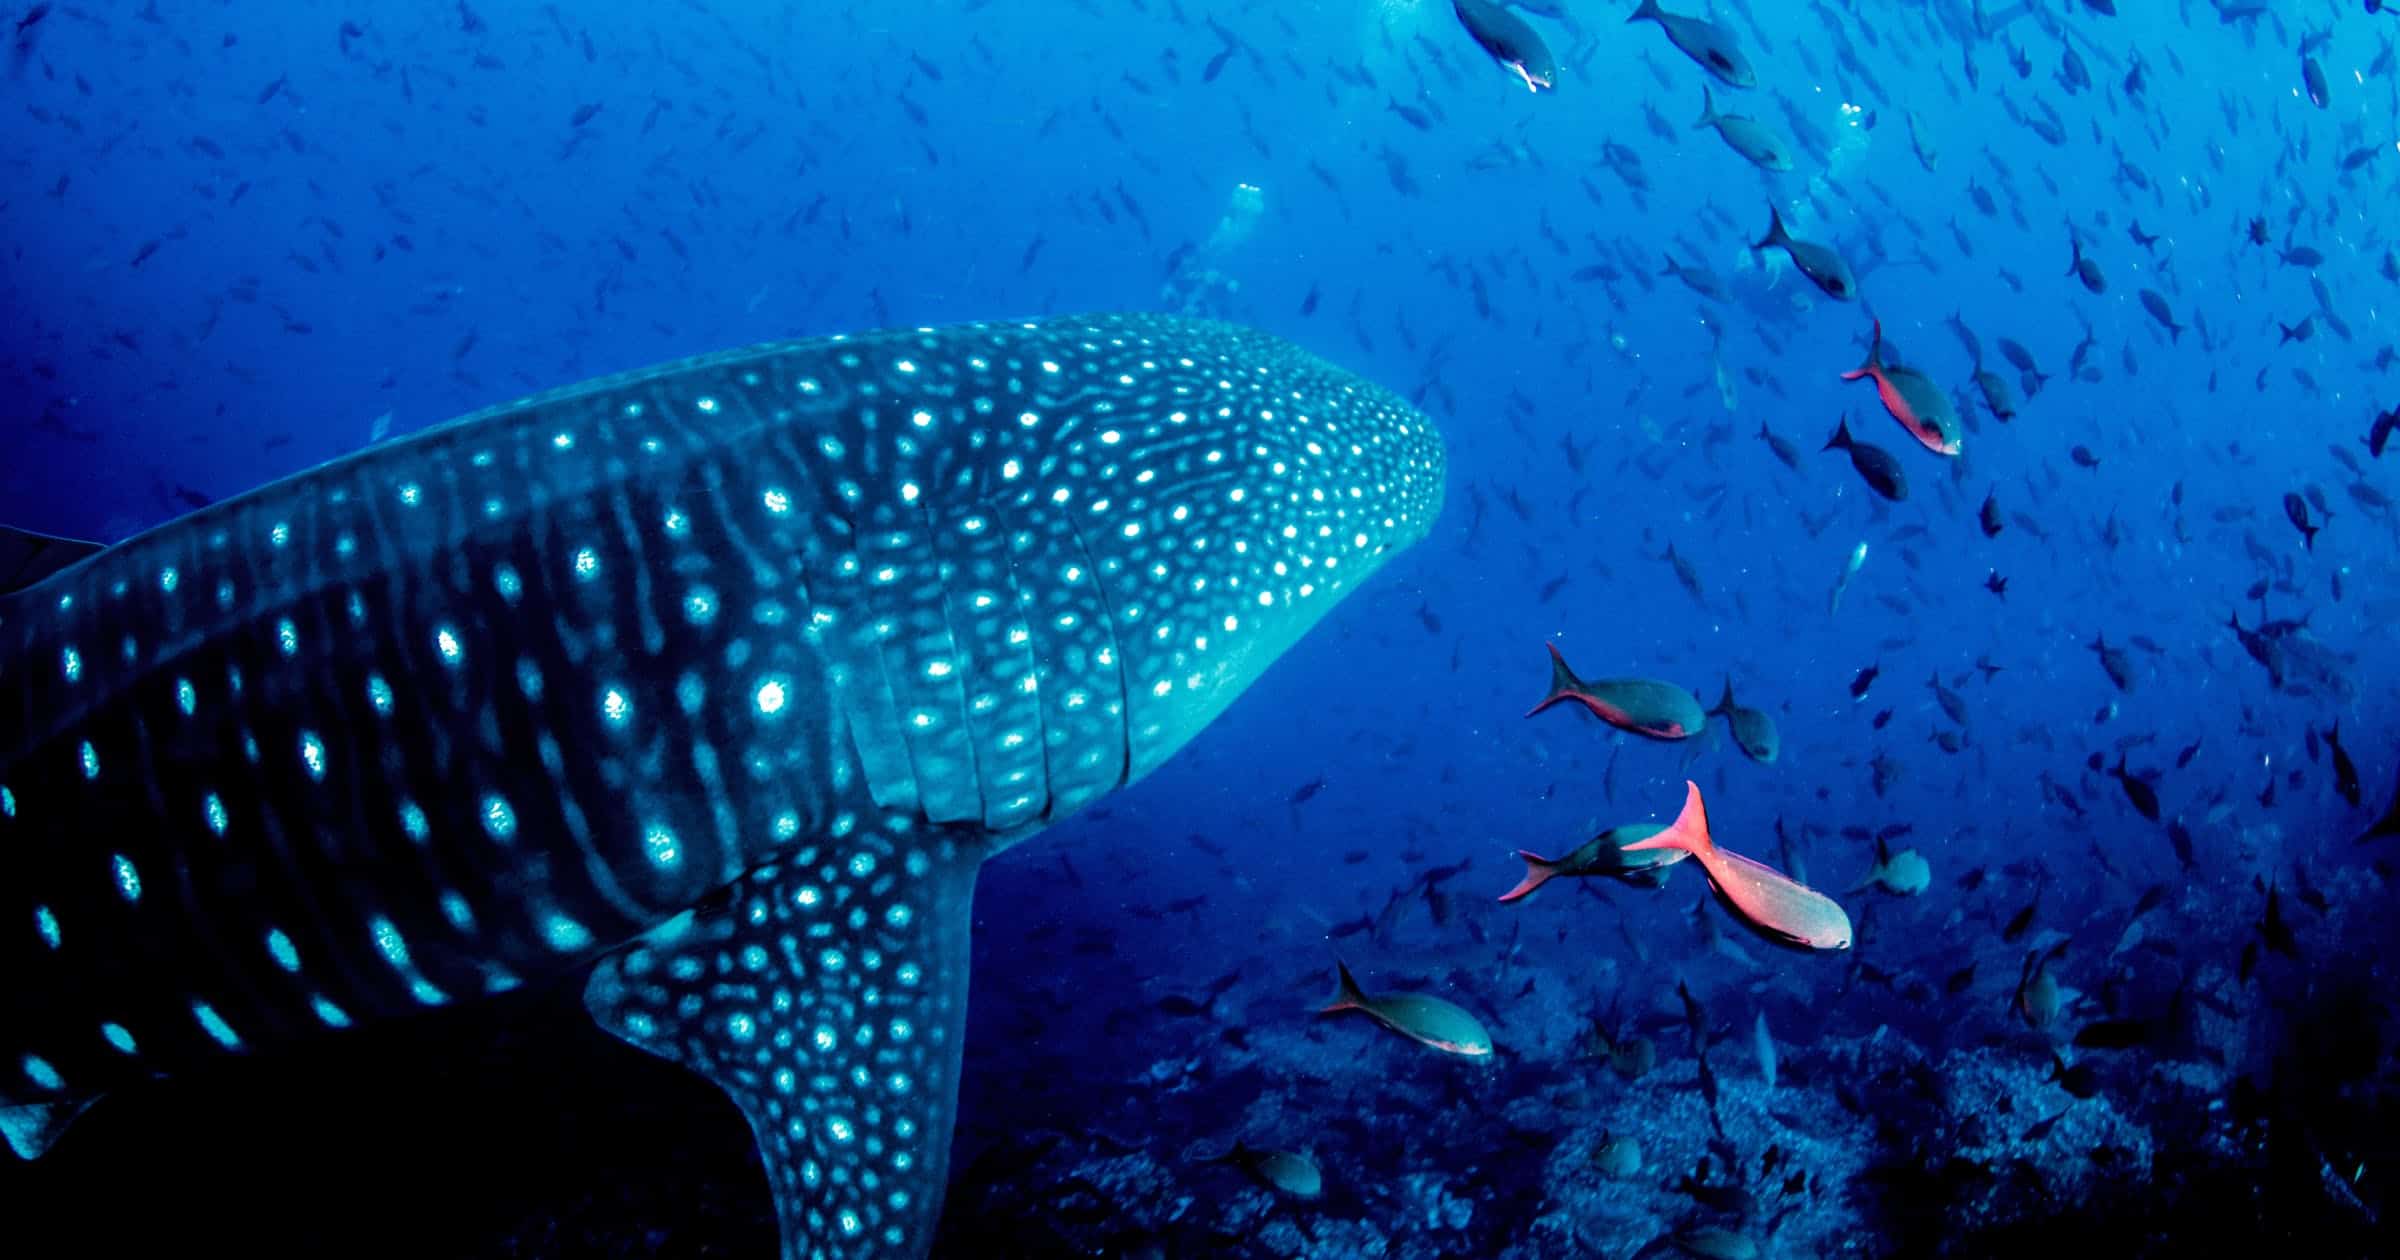 Scuba diving with a whale shark from the Galapagos Islands, Ecuador
